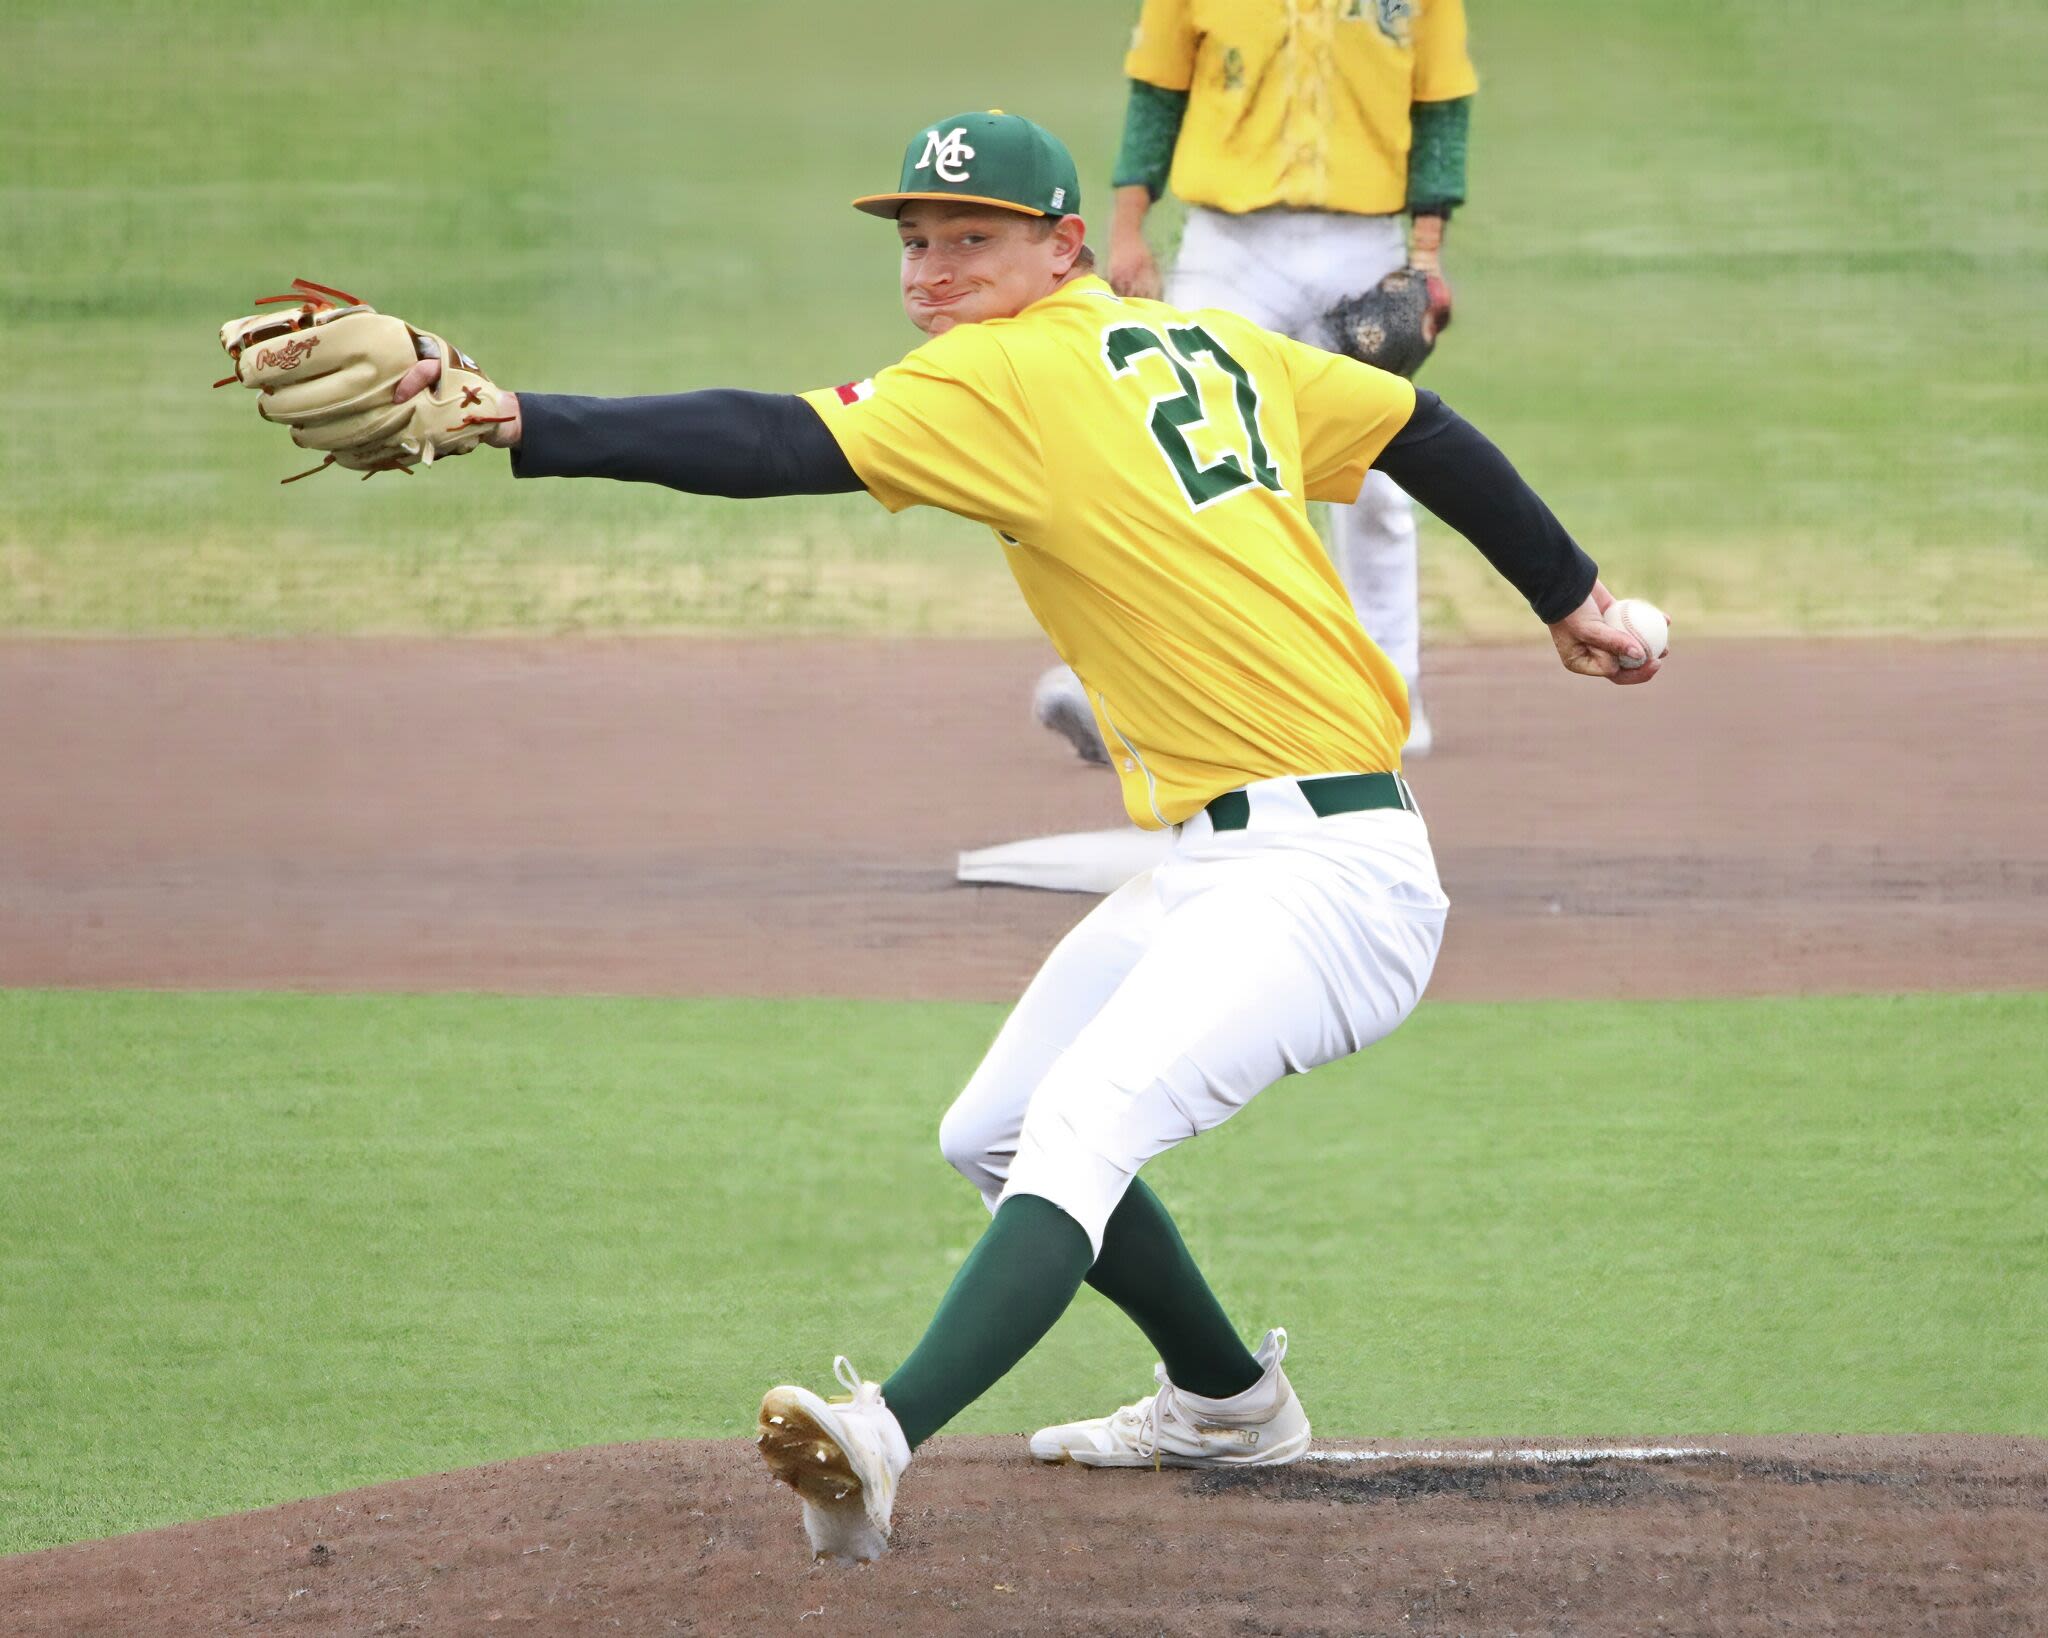 JC BASEBALL: Midland College beats Howard to stay alive in tourney